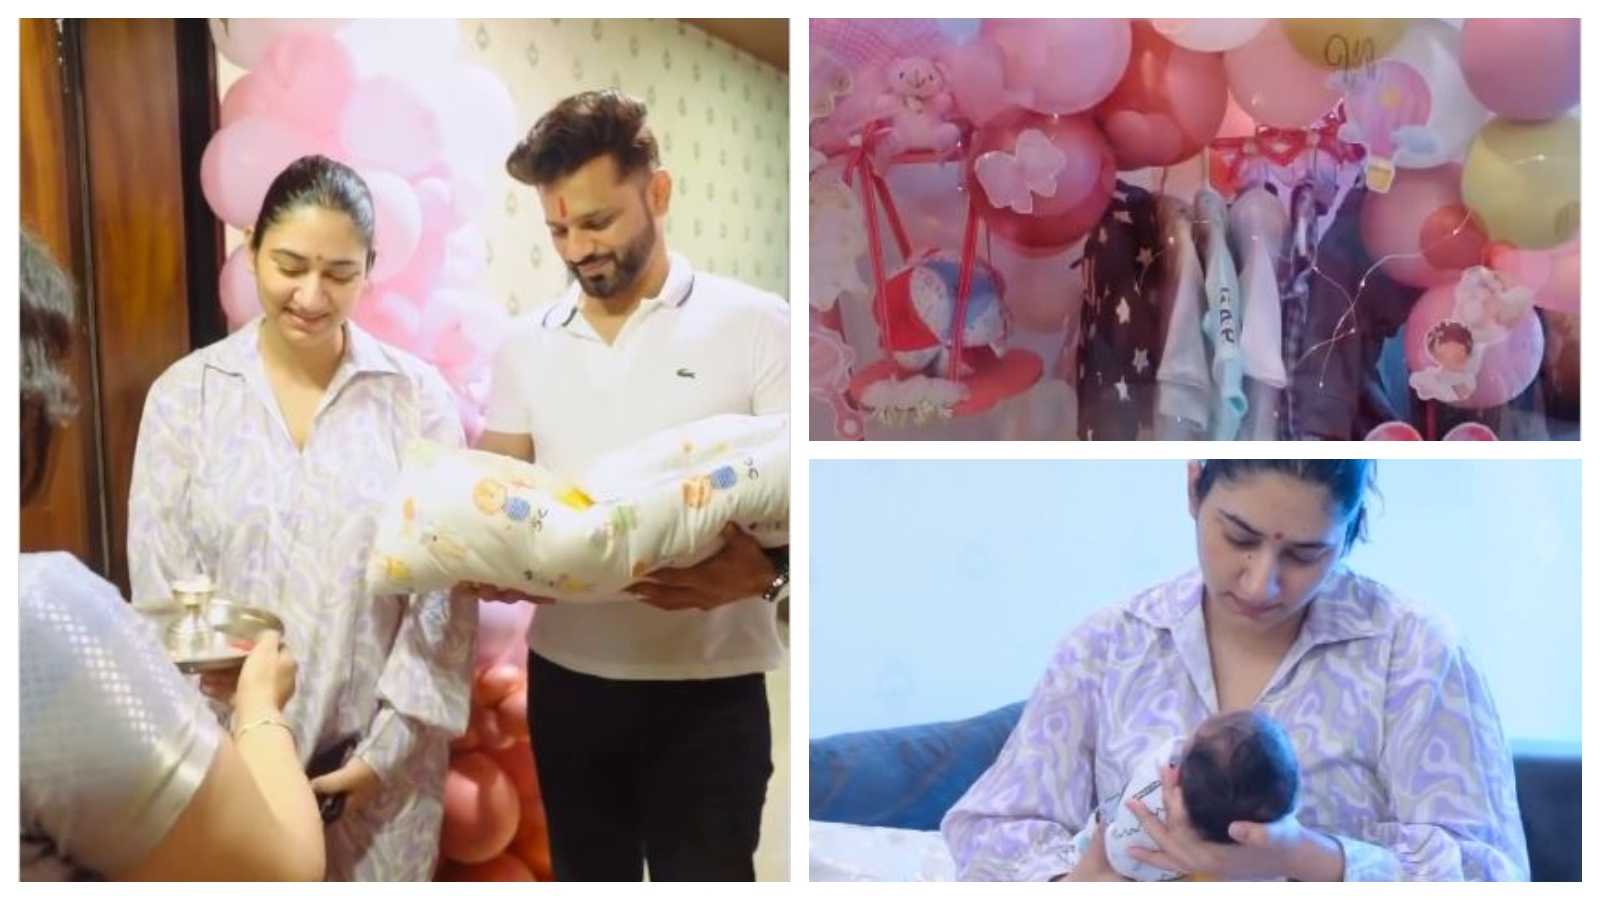 'Couldn’t have asked for a better birthday': Rahul Vaidya welcomes wife Disha Parmar & his newborn daughter home; shares video